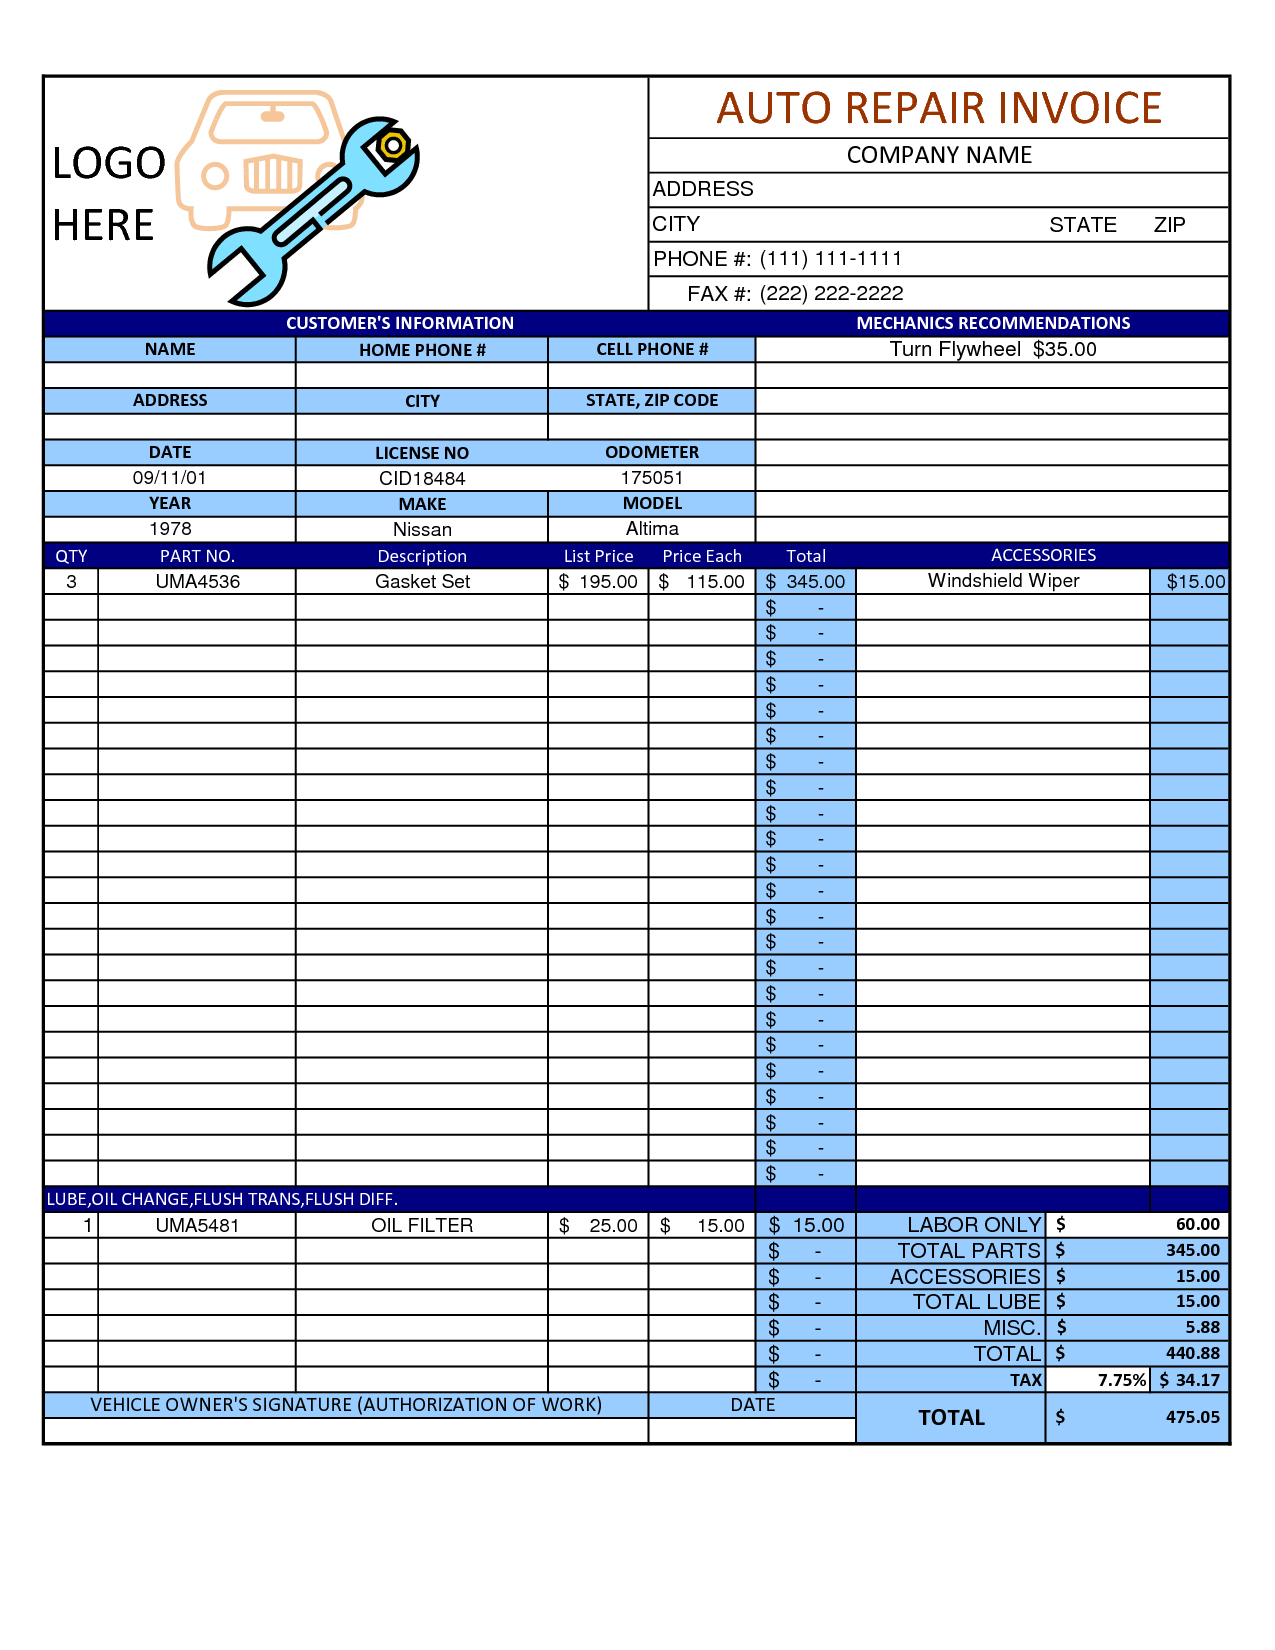 Mechanic Shop Invoice | Scope Of Work Template In 2019 With Job Card Template Mechanic